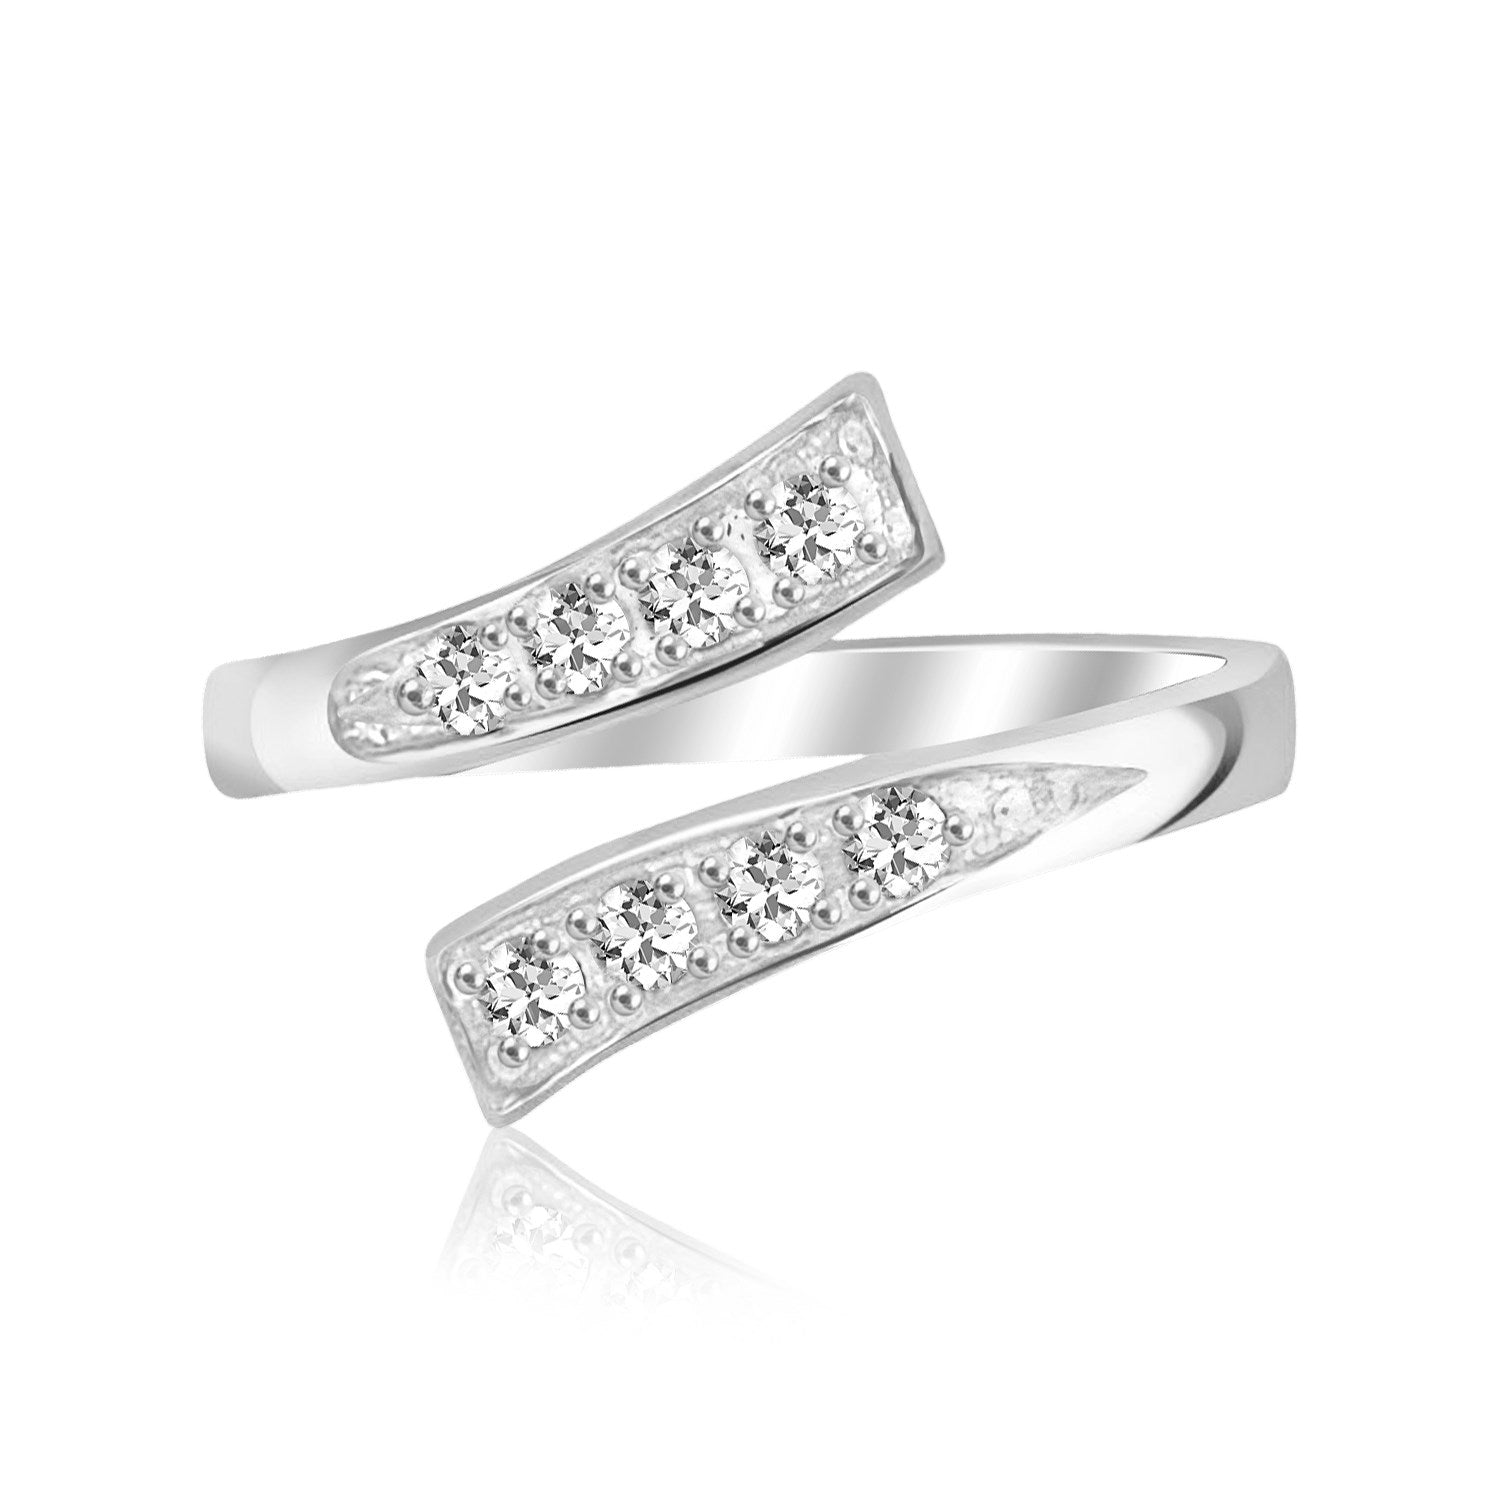 Sterling Silver Rhodium Plated Toe Ring with White Cubic Zirconia Accents